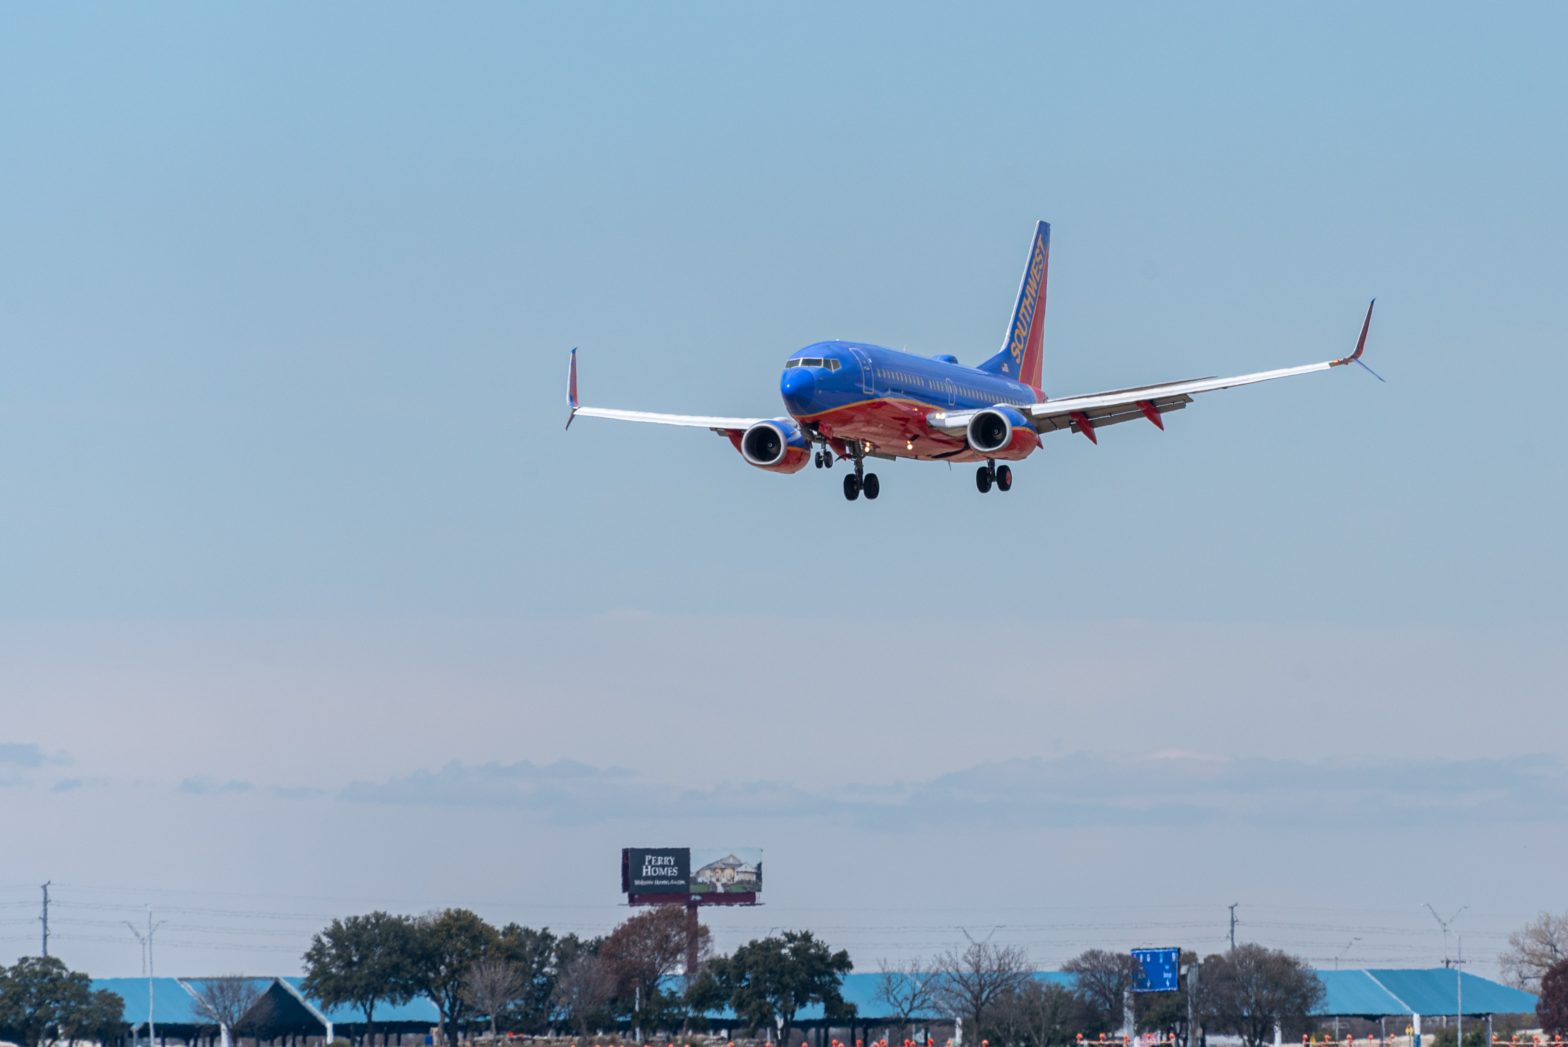 A Woman of Color Was Allegedly Assaulted by a White Man On Southwest Airlines